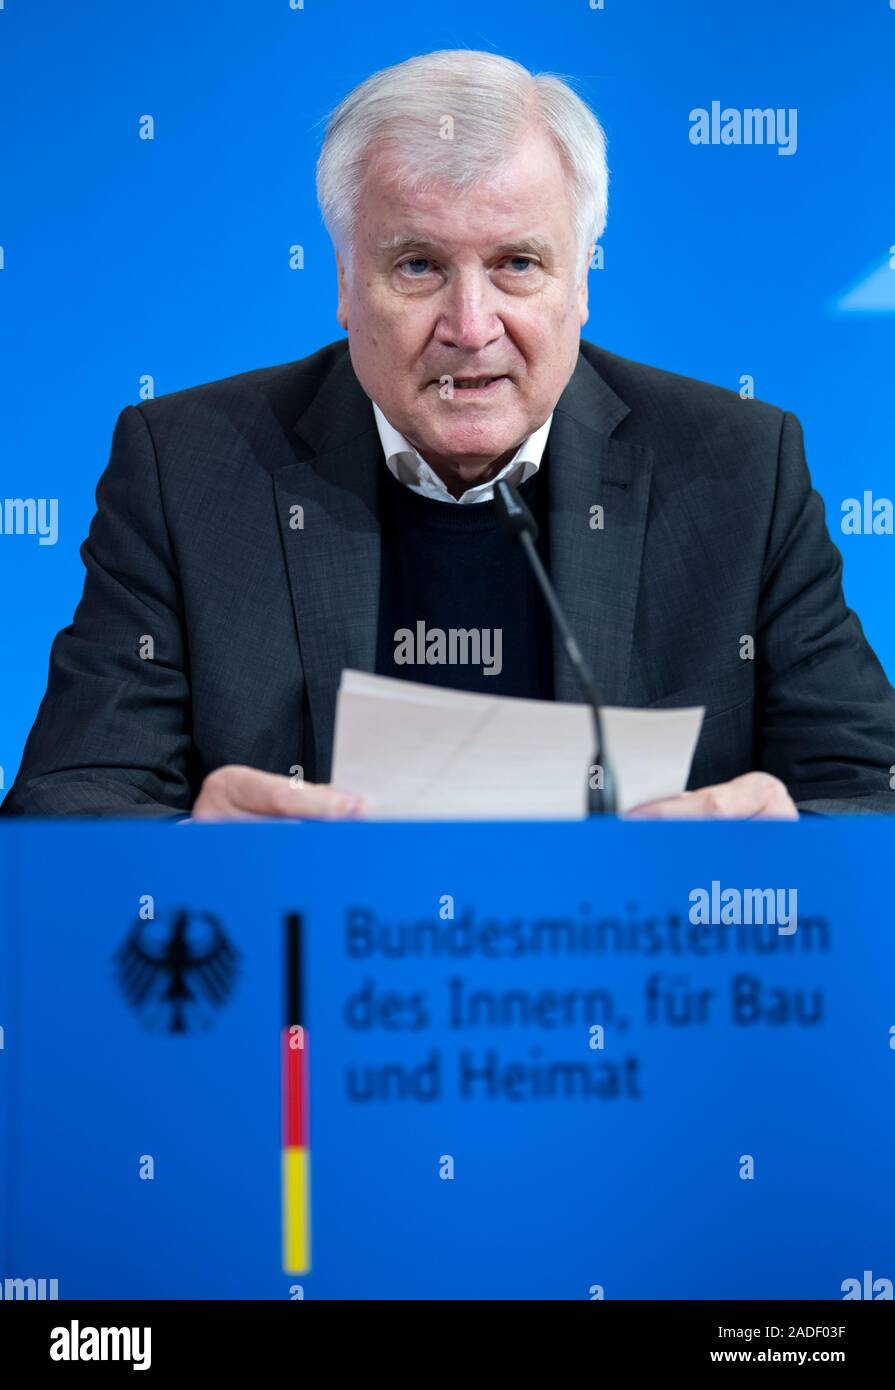 Berlin, Germany. 04th Dec, 2019. Horst Seehofer (CSU), Federal Minister of the Interior, Home Affairs and Construction, comments at a press conference at the Federal Ministry of the Interior, Home Affairs and Construction on the progress of the tightened control and investigation measures at the internal borders. Credit: Bernd von Jutrczenka/dpa/Alamy Live News Stock Photo